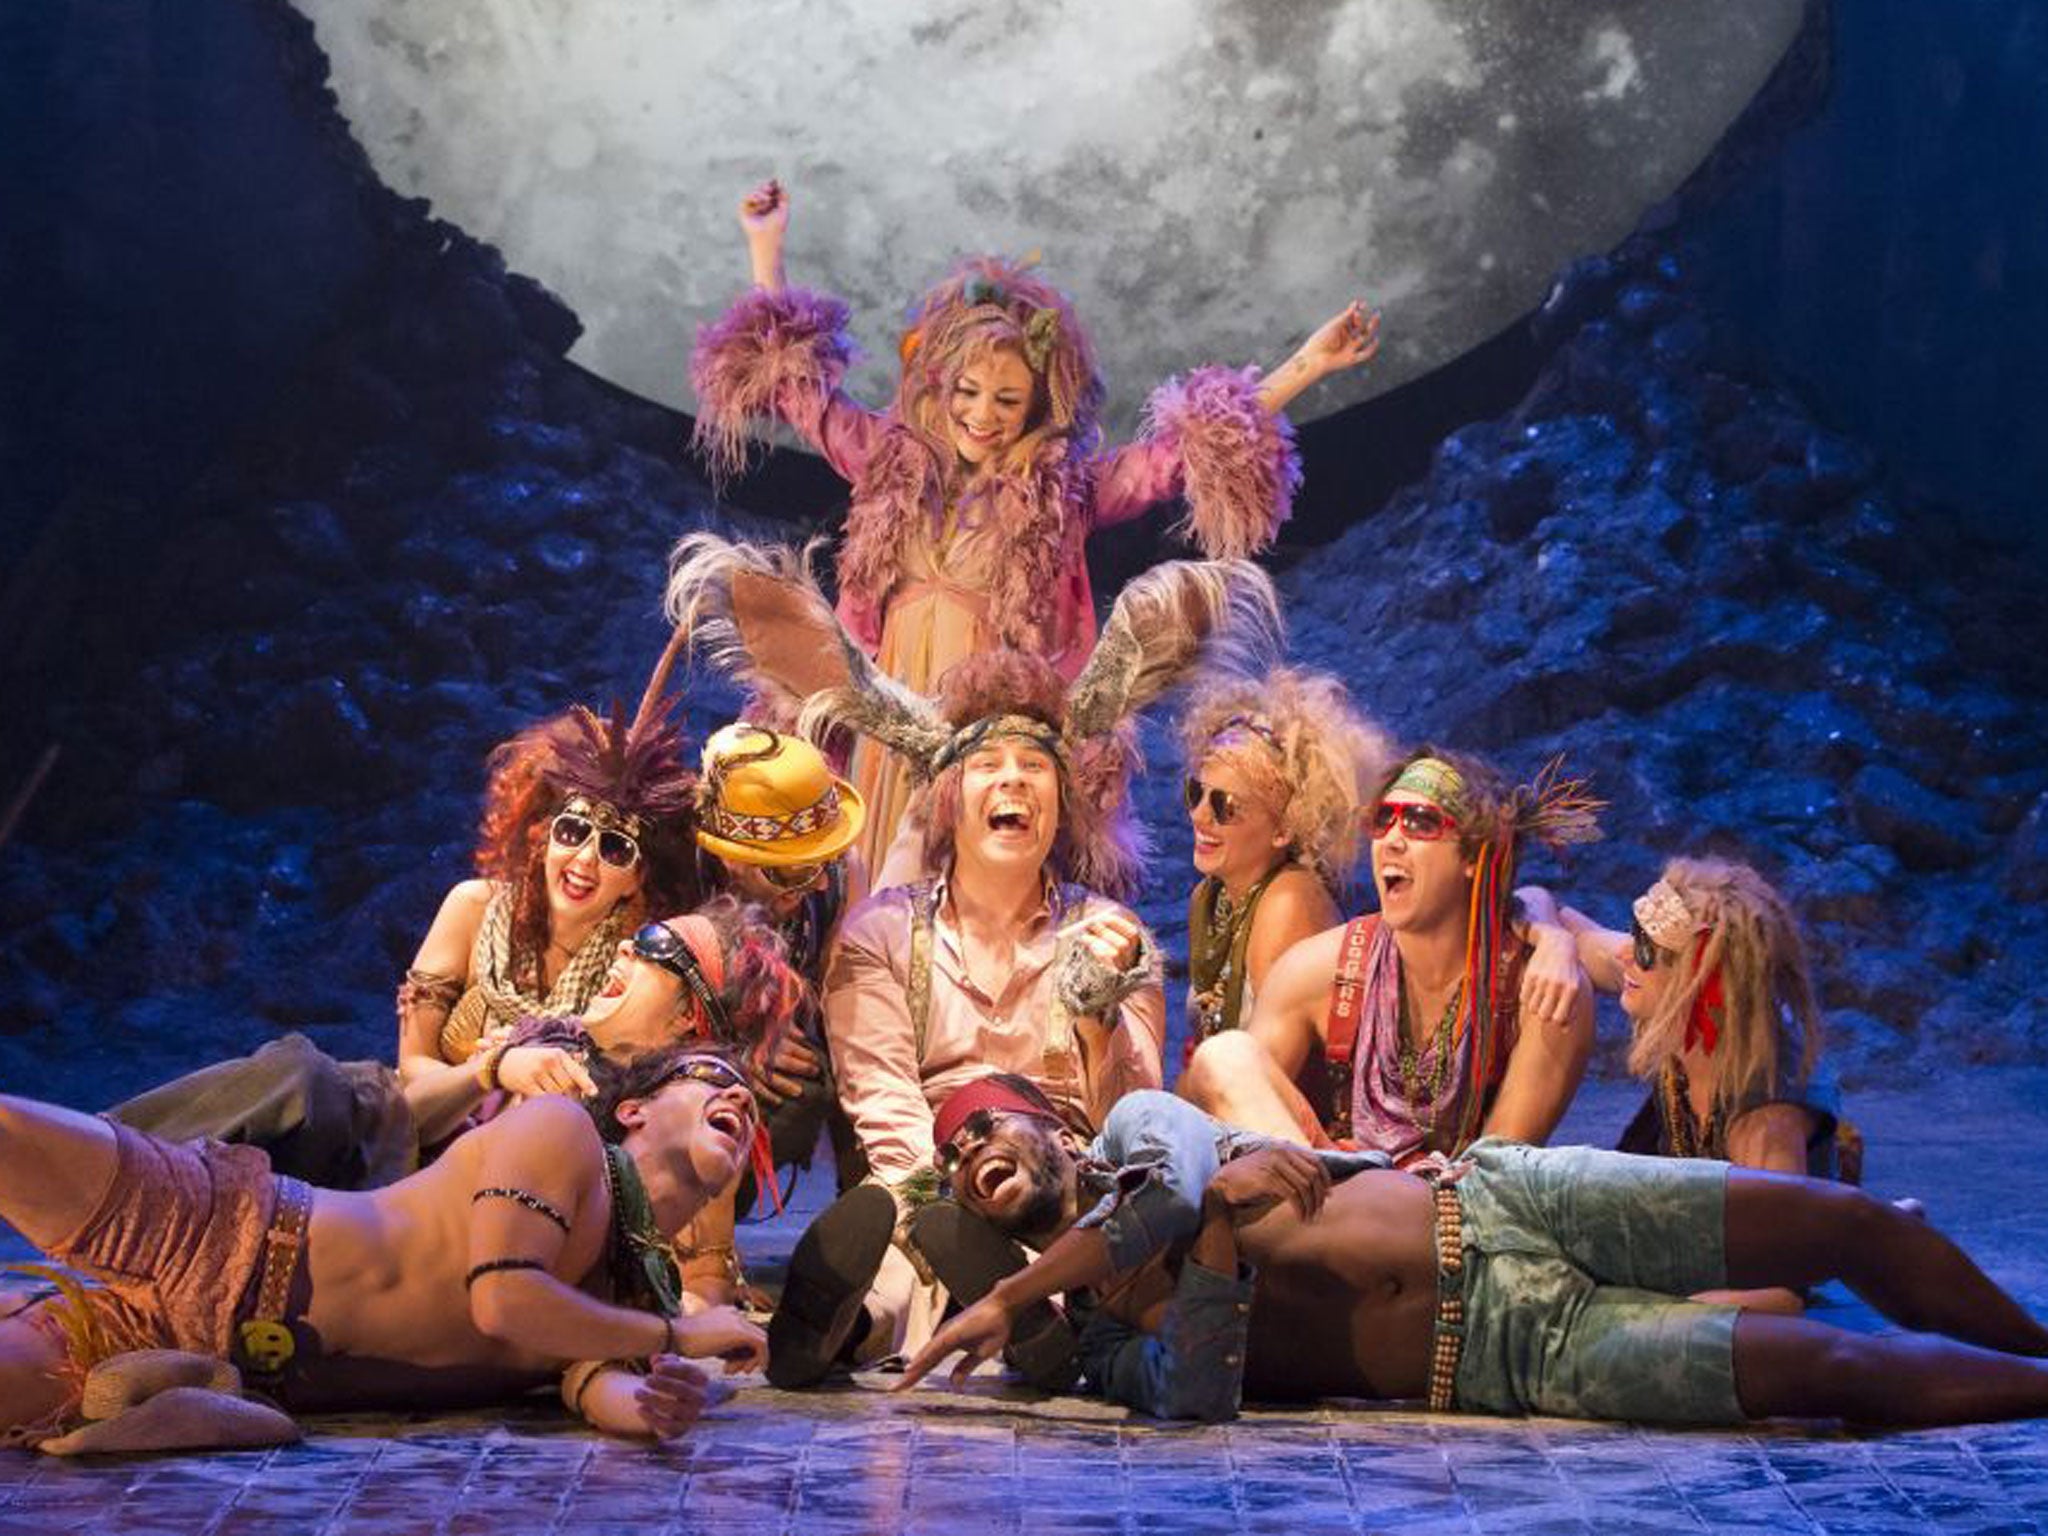 Sheridan Smith (top), David Walliams (centre) and the company during the production of William Shakespeare's 'A Midsummer Nightís Dream' at the Noel Coward Theatre in London